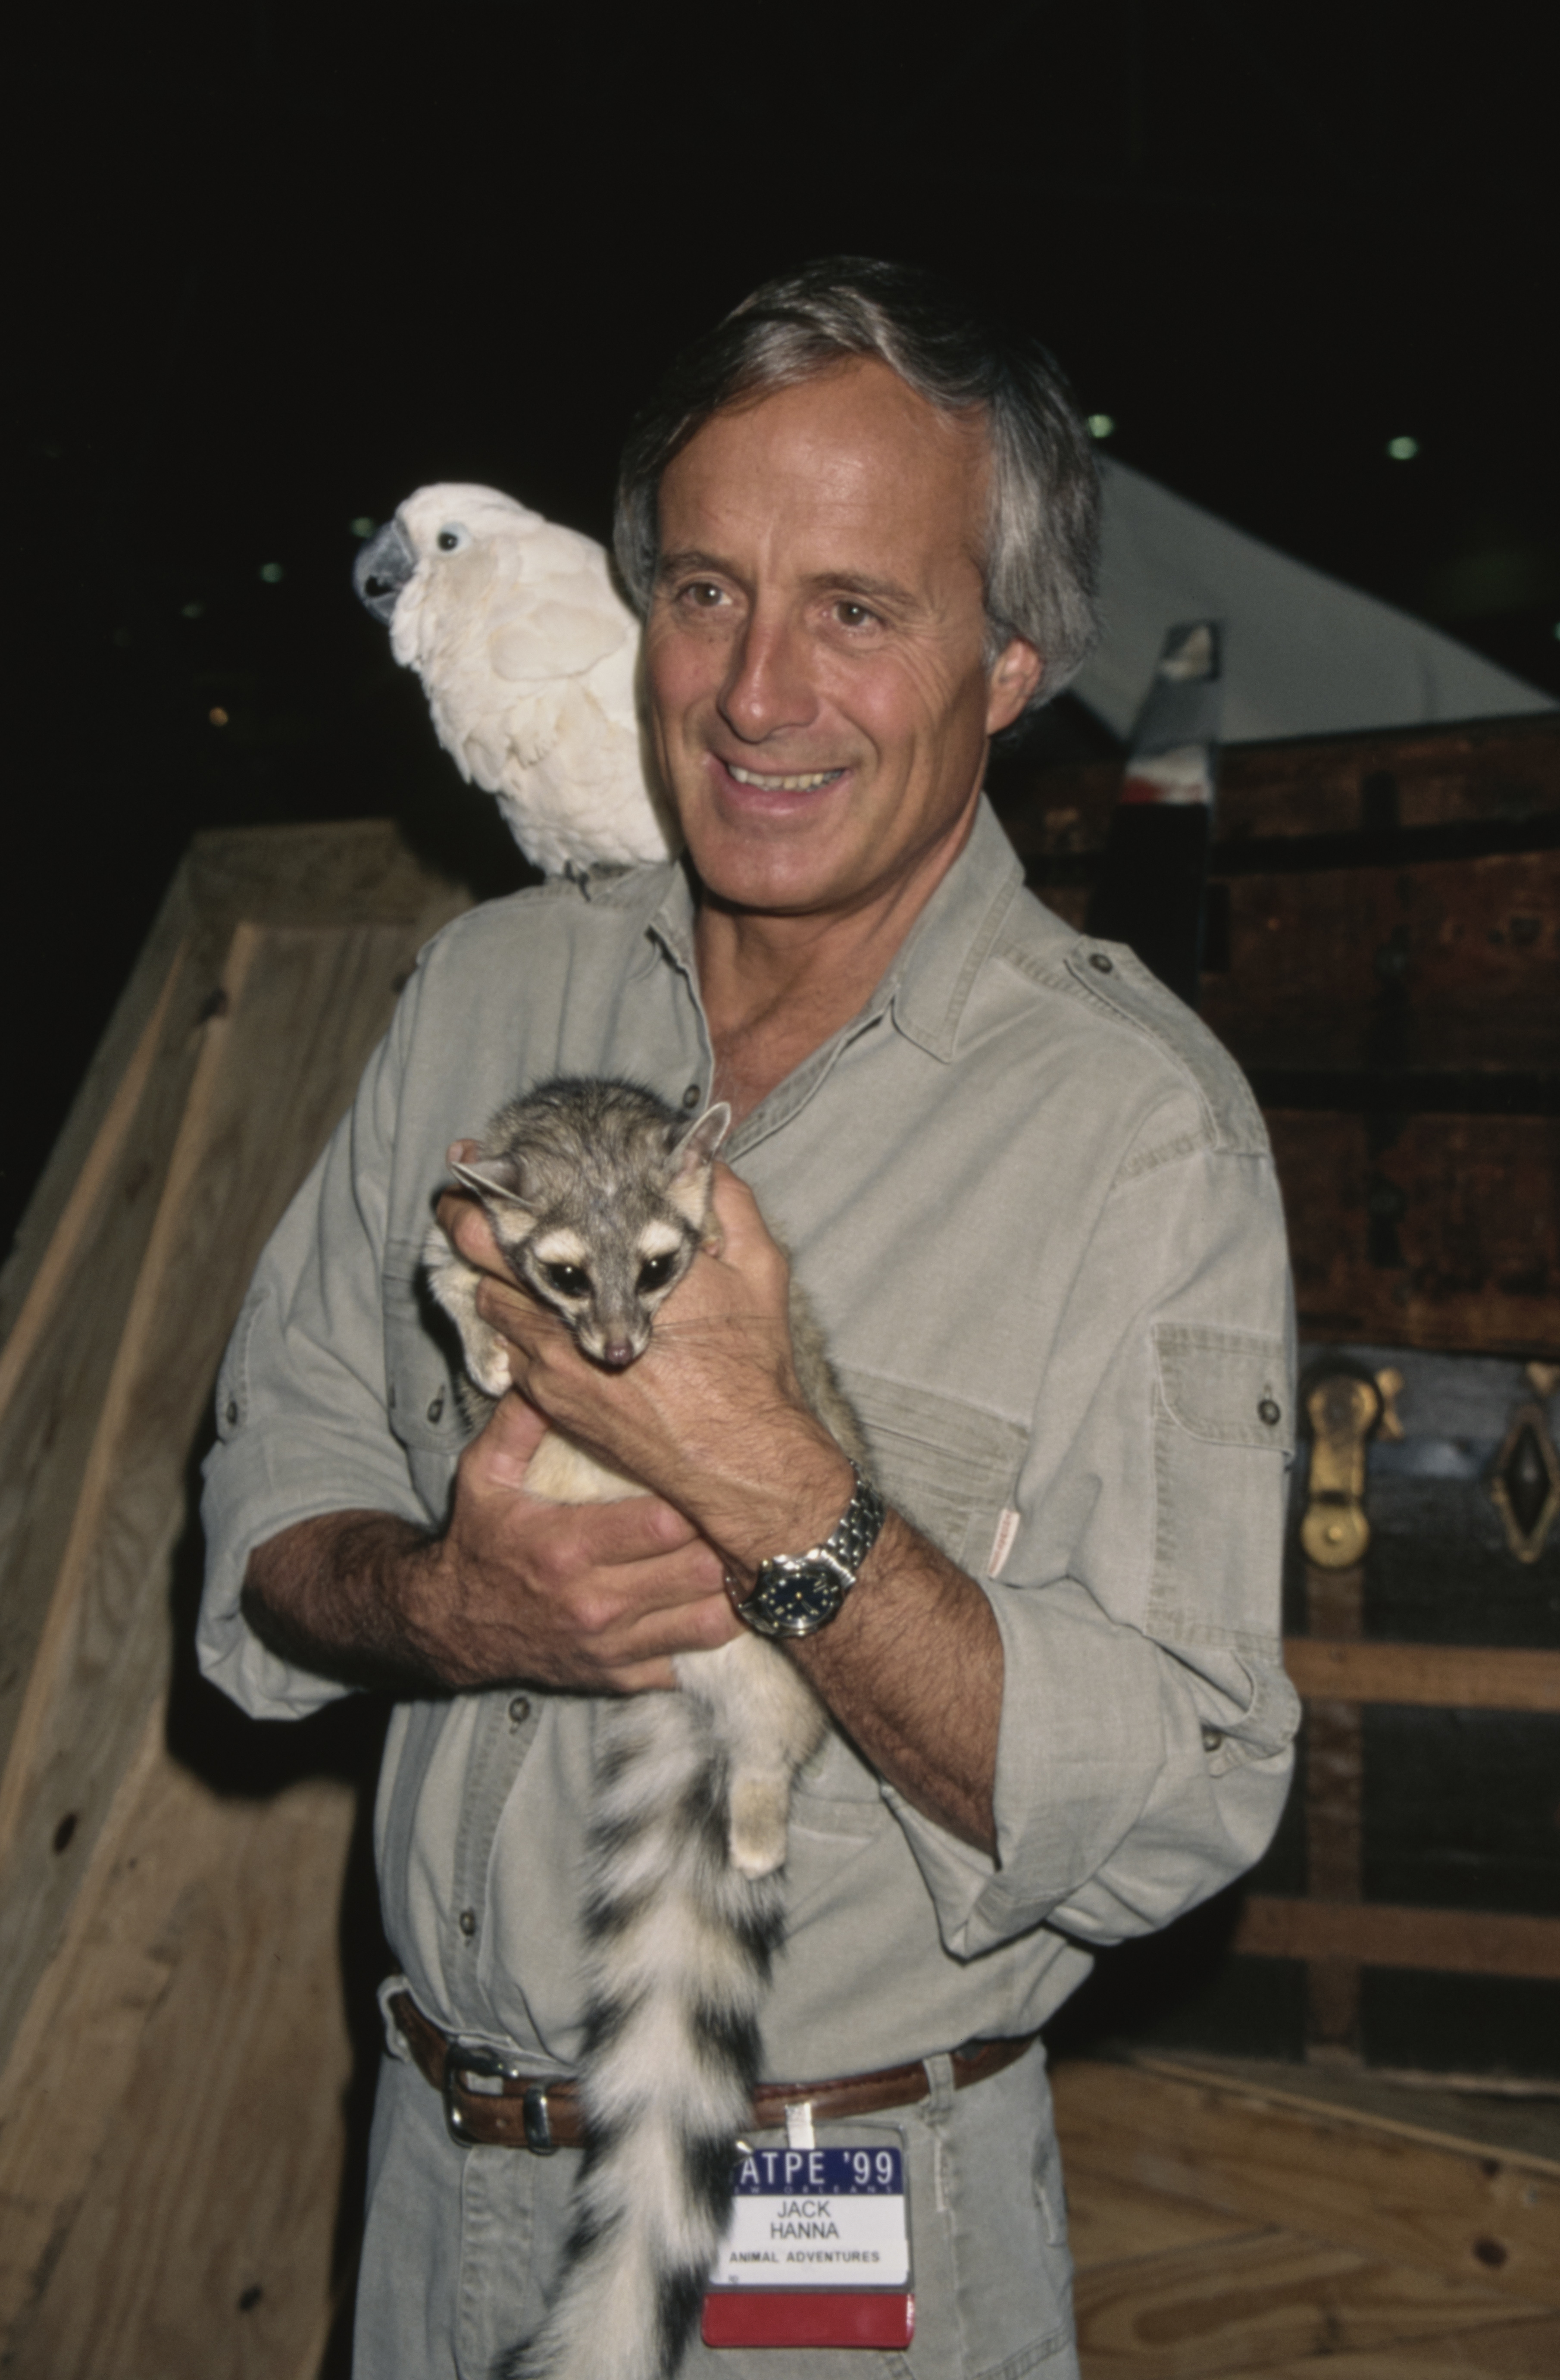 Jack Hanna in New Orleans, Louisiana, January 1999 | Source: Getty Images